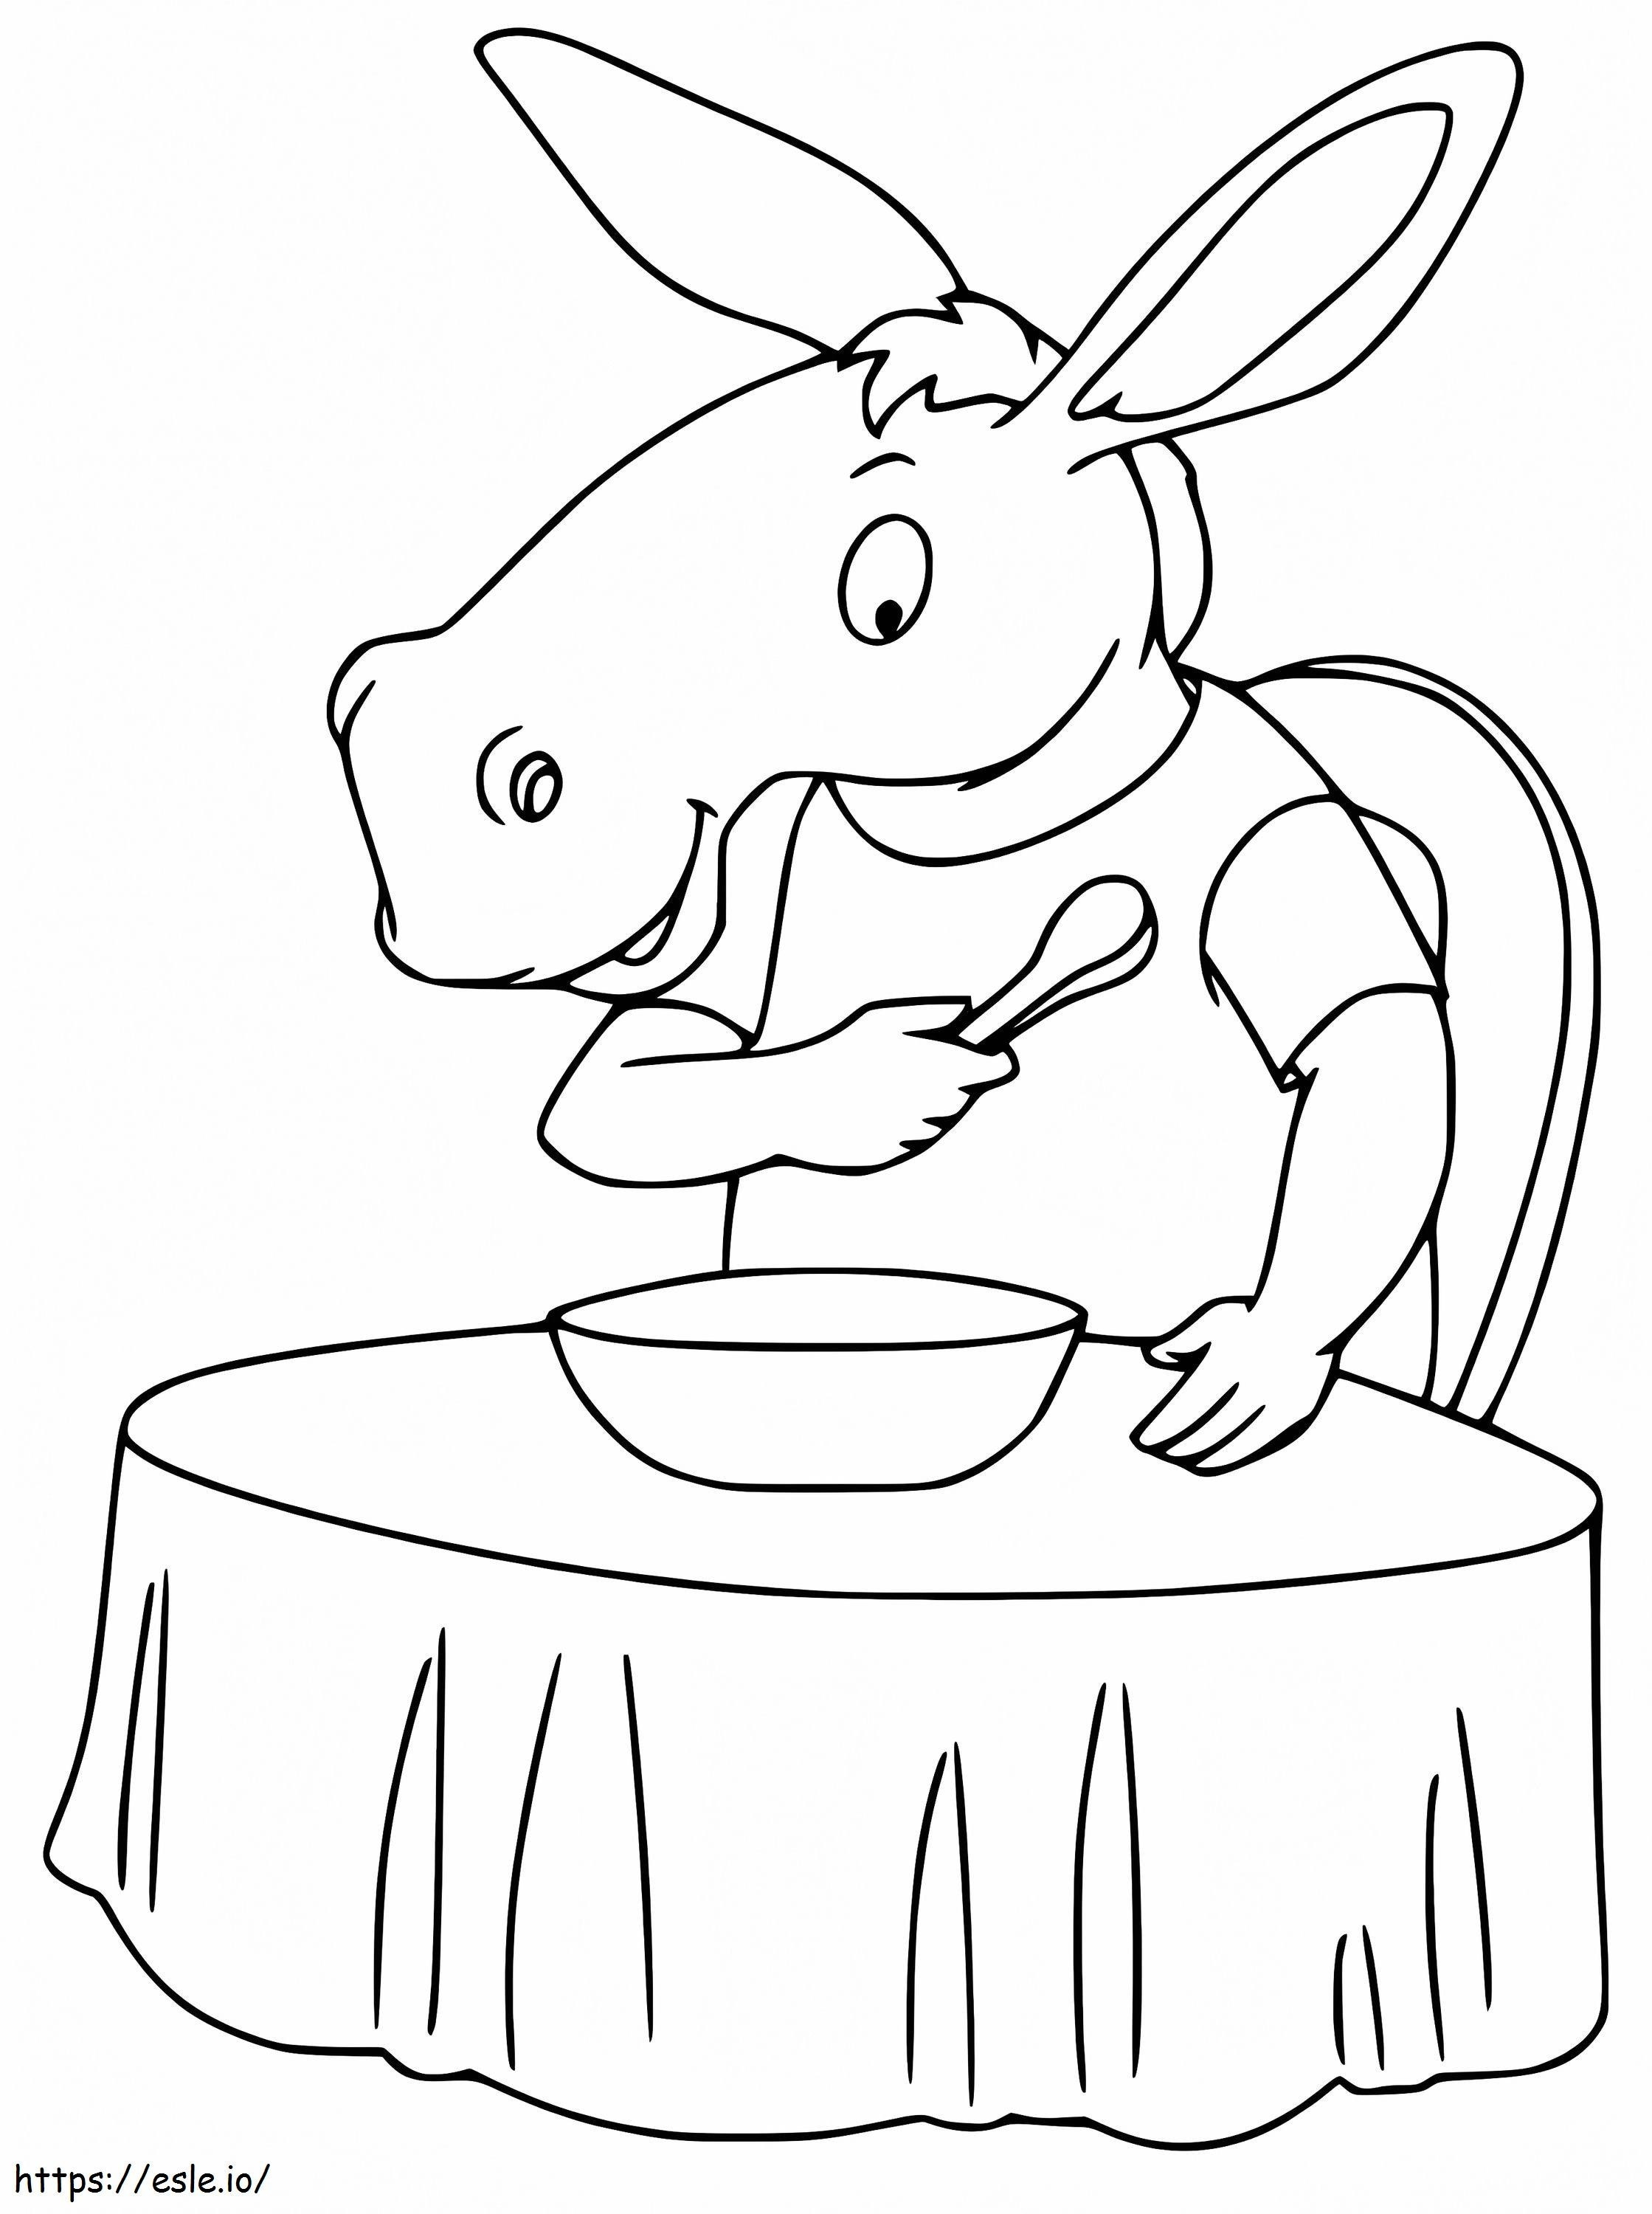 Funny Mule coloring page